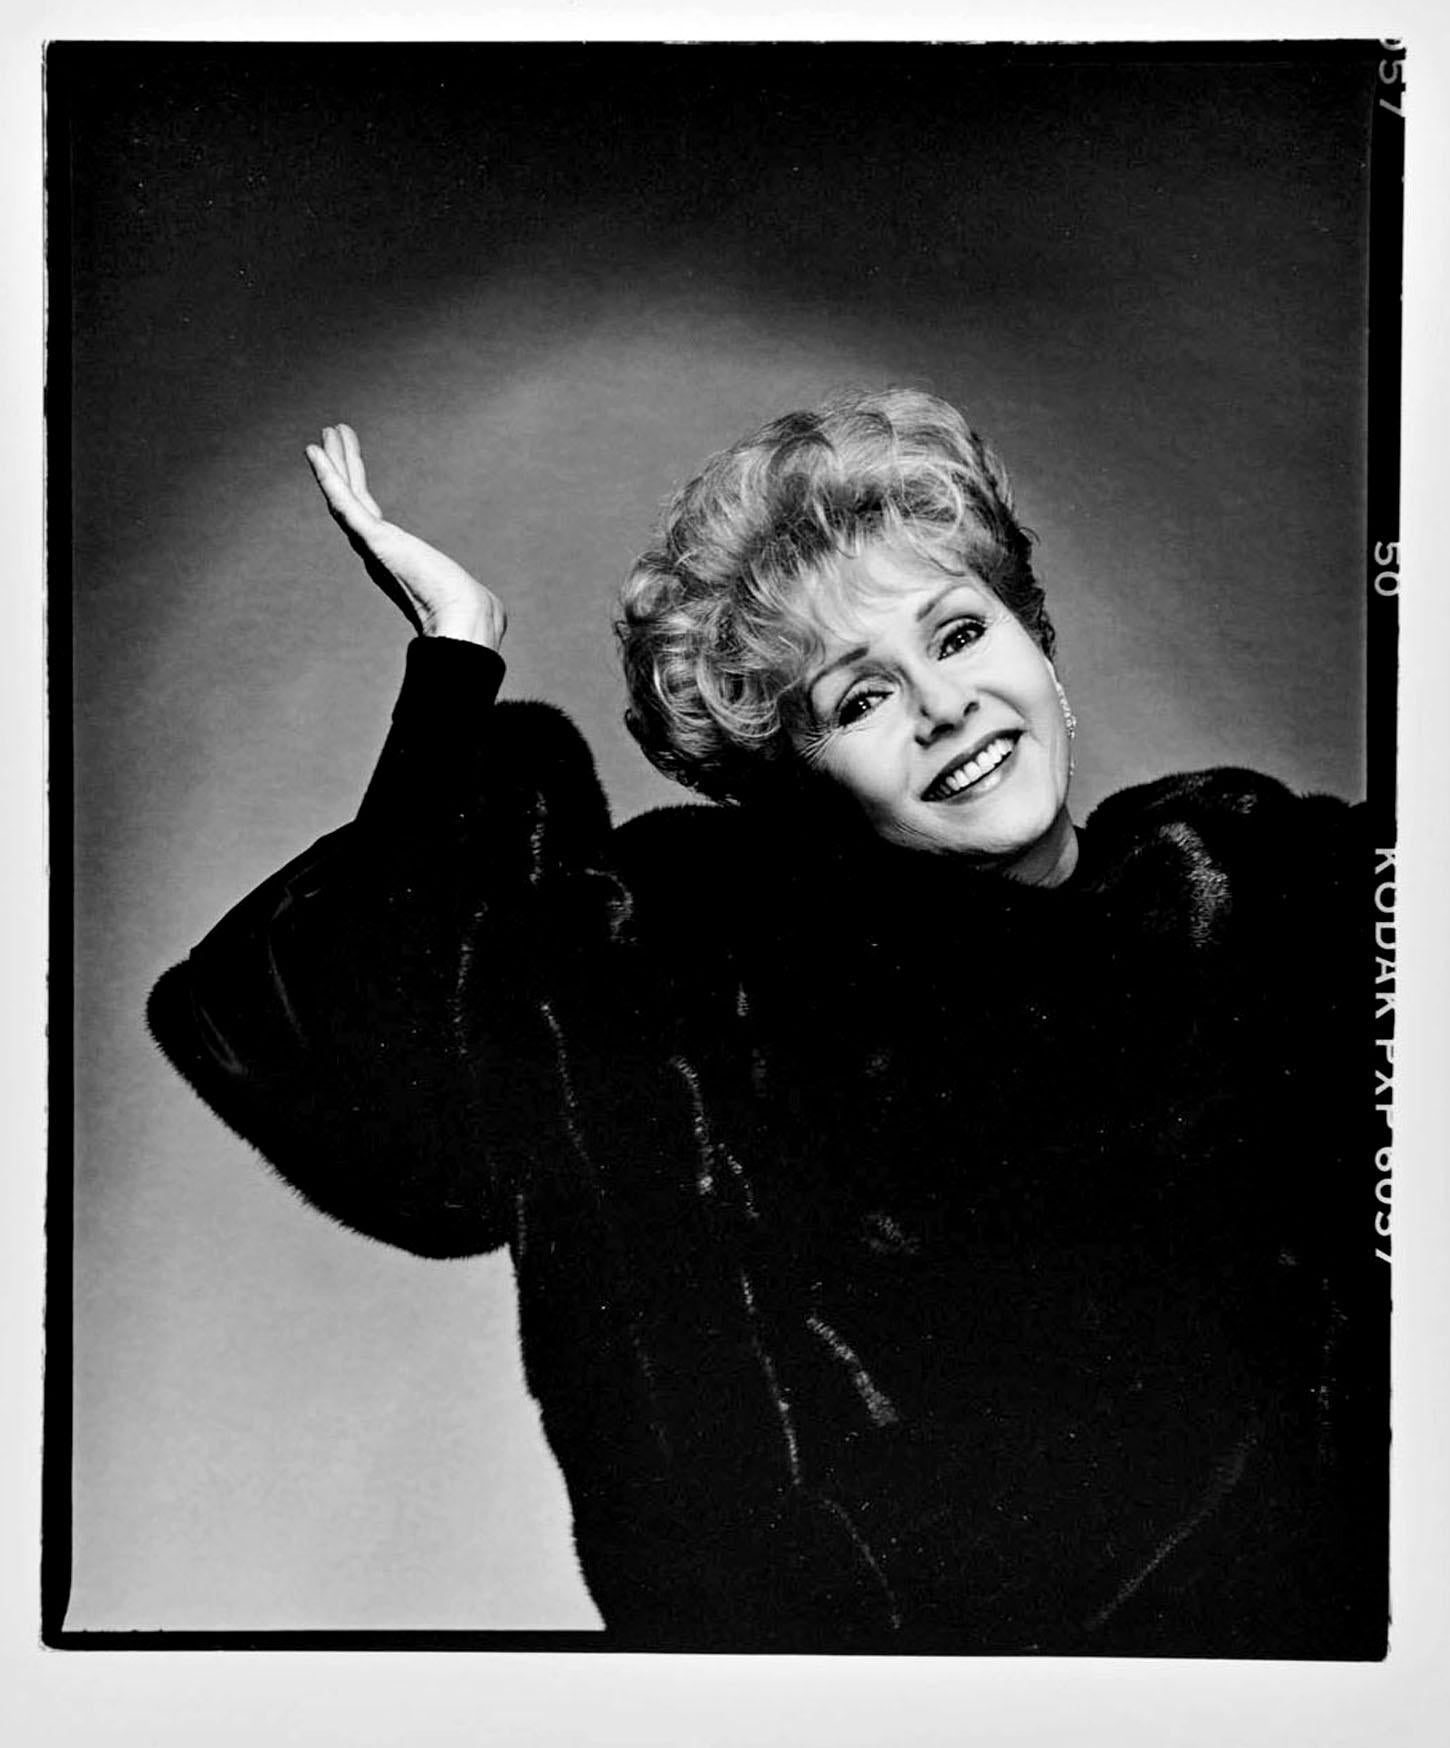 Jack Mitchell Black and White Photograph - Actress Debbie Reynolds 'What Becomes a Legend Most?' Blackglama Session Photo